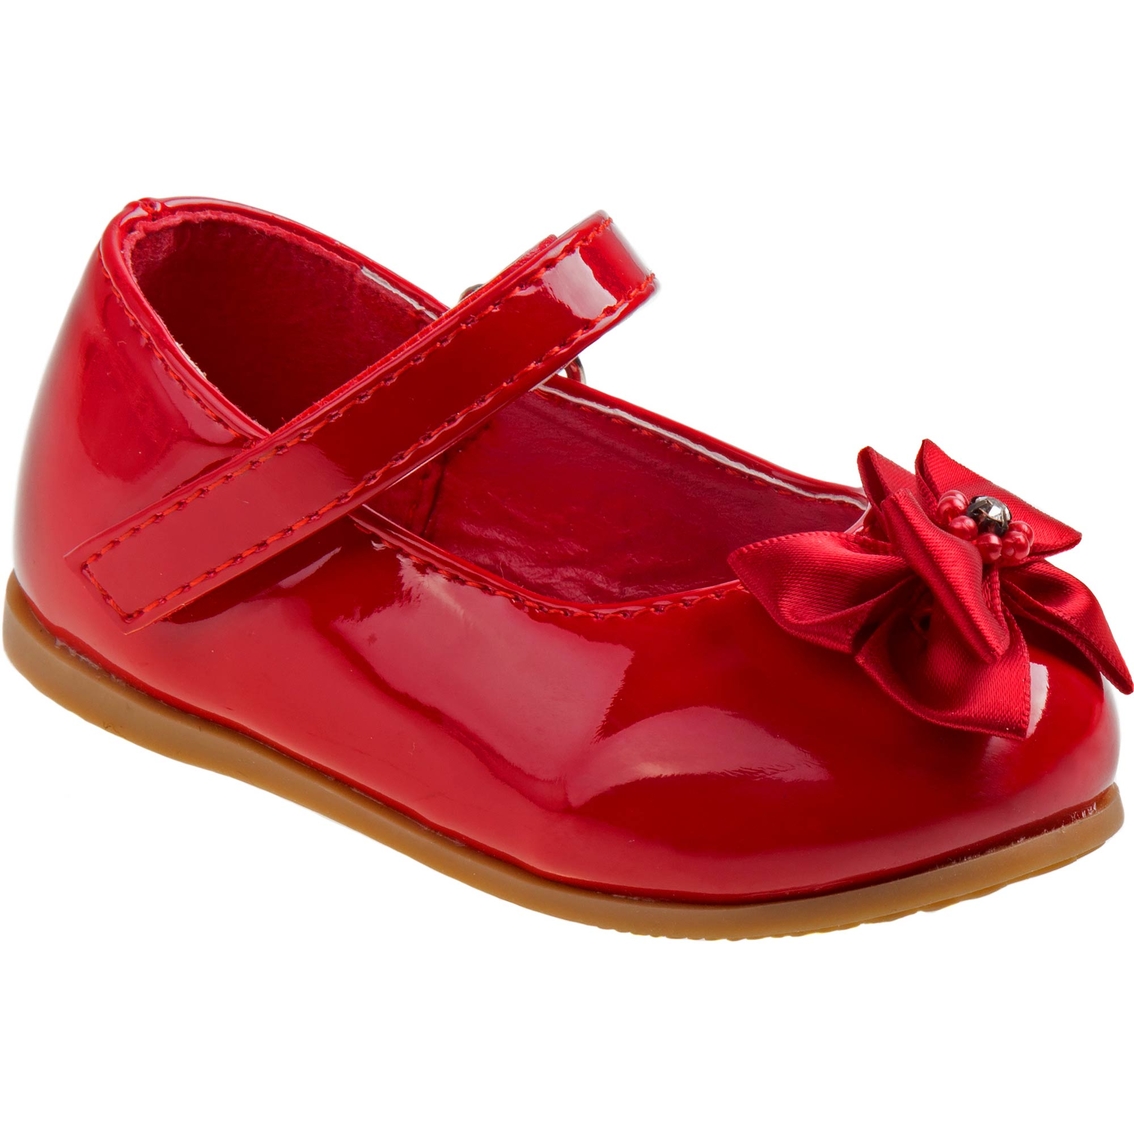 red patent baby girl shoes